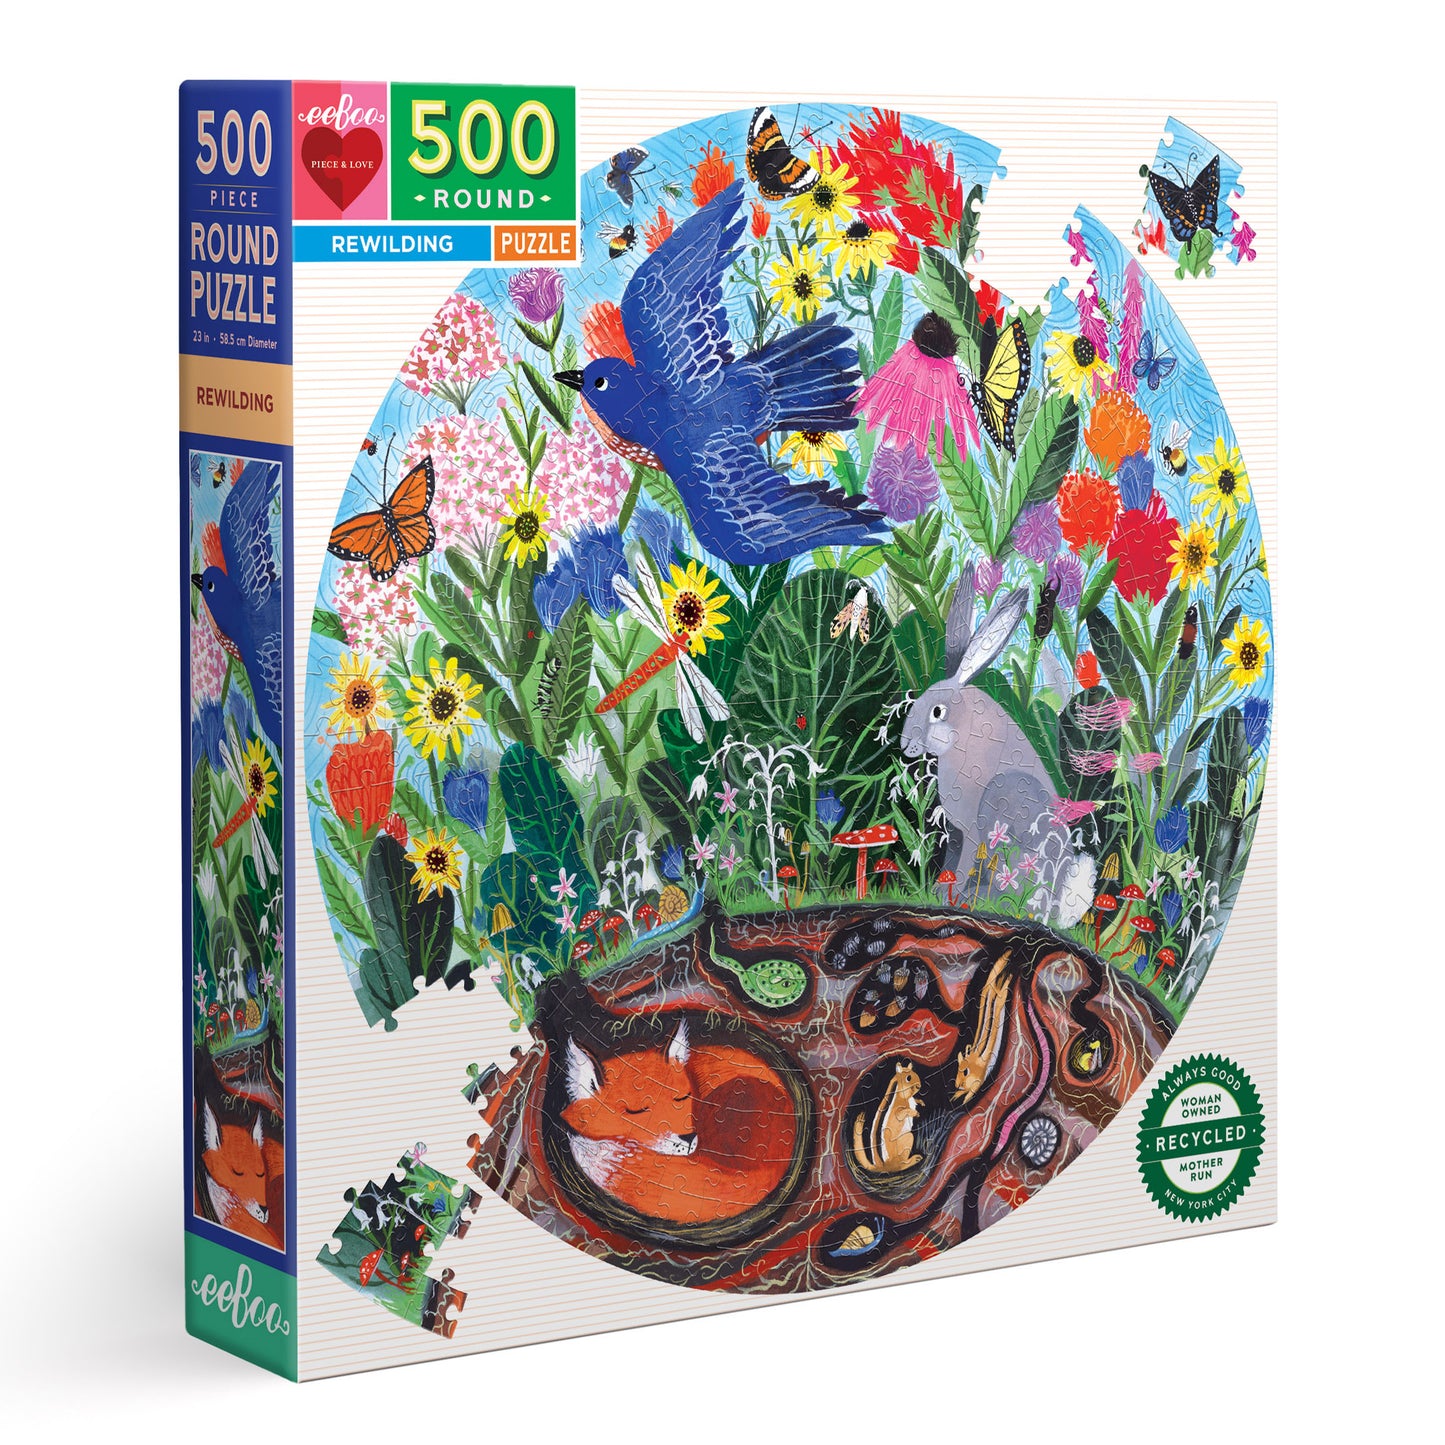 Rewilding Nature 500 Piece Round Jigsaw Puzzle | eeBoo Piece & Love | Great Gifts for Animal Lovers